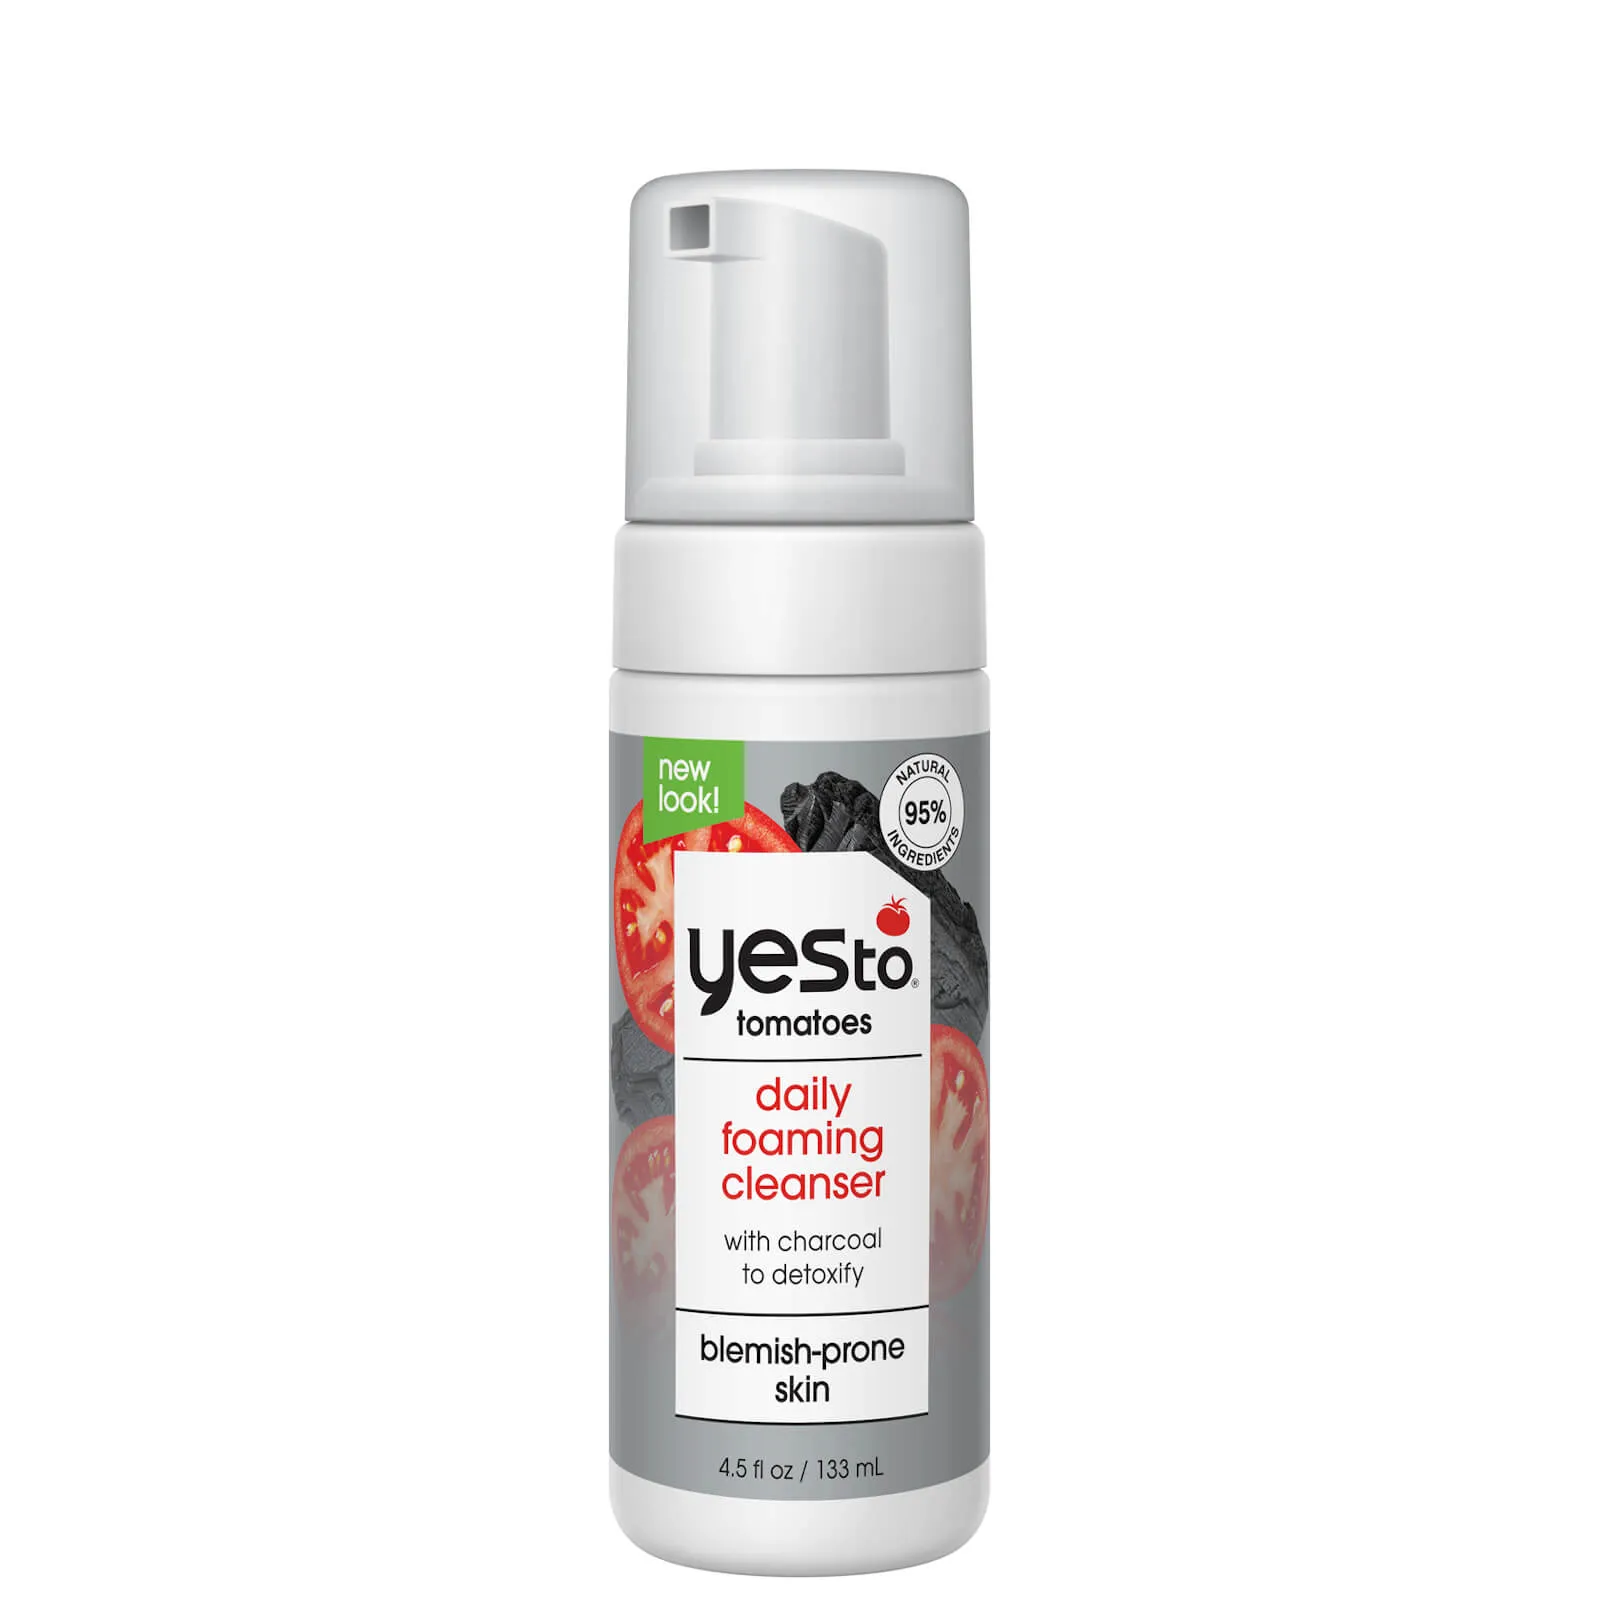 yes to Tomatoes Detoxifying Charcoal Oxygenated Detergente 133ml